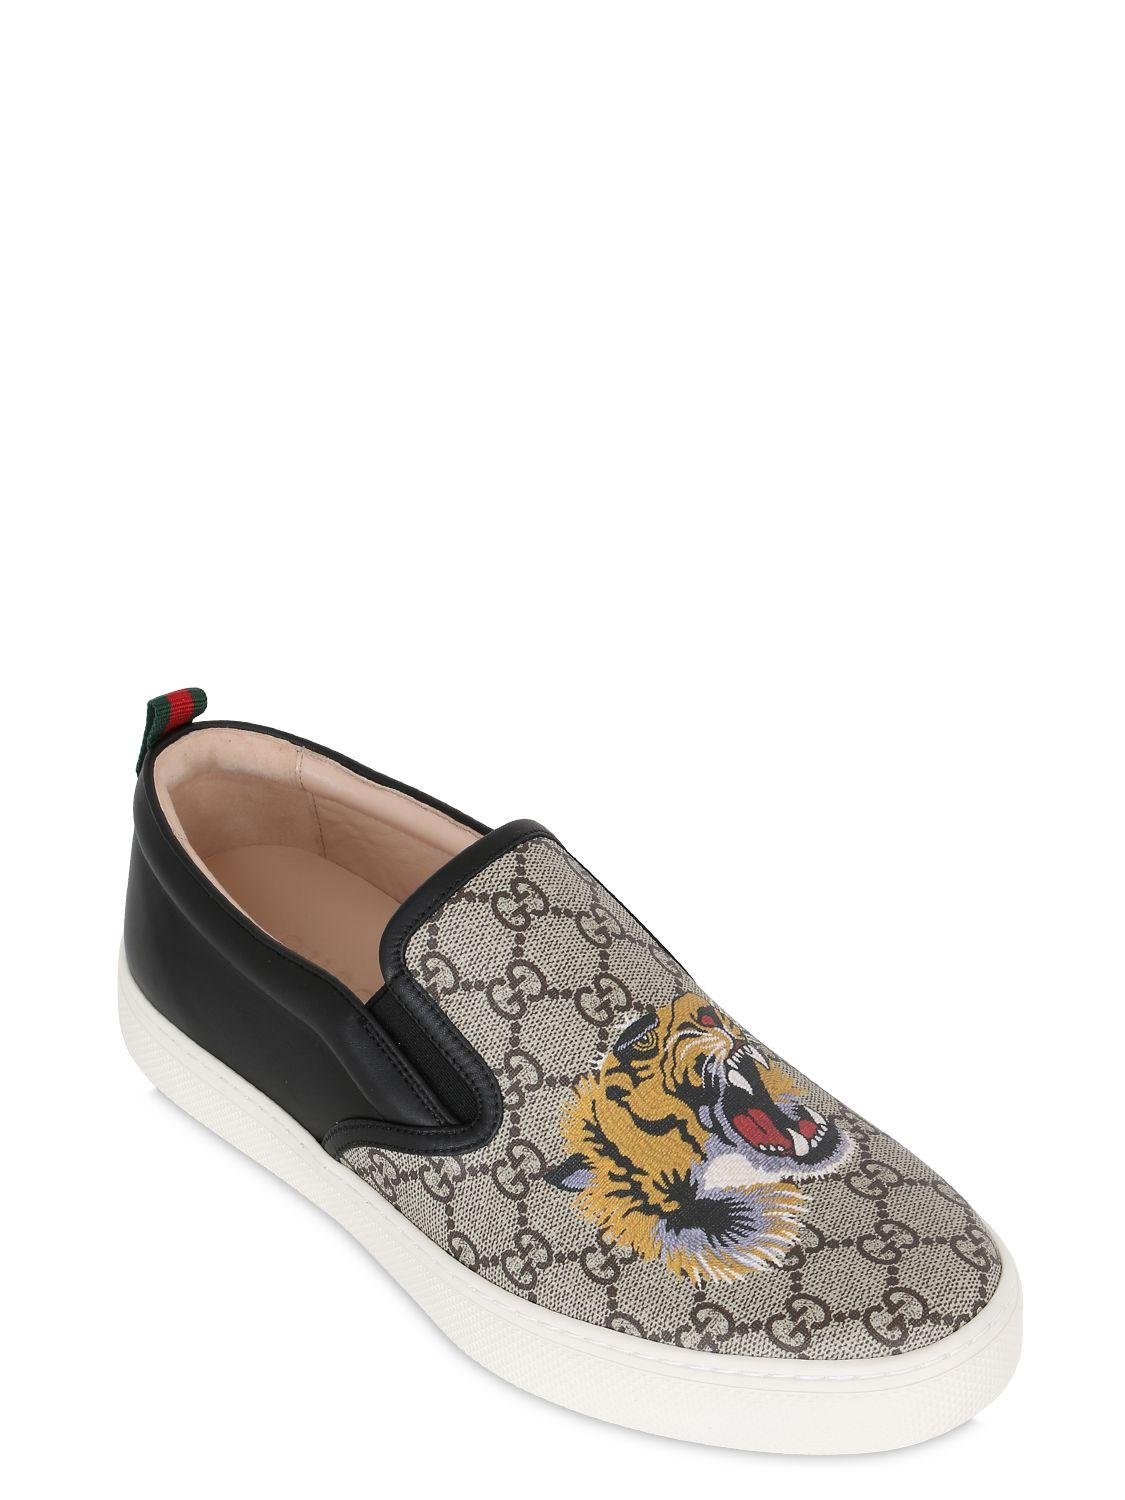 Gucci Tiger Print Gg Supreme Slip On Sneakers in Natural for Men